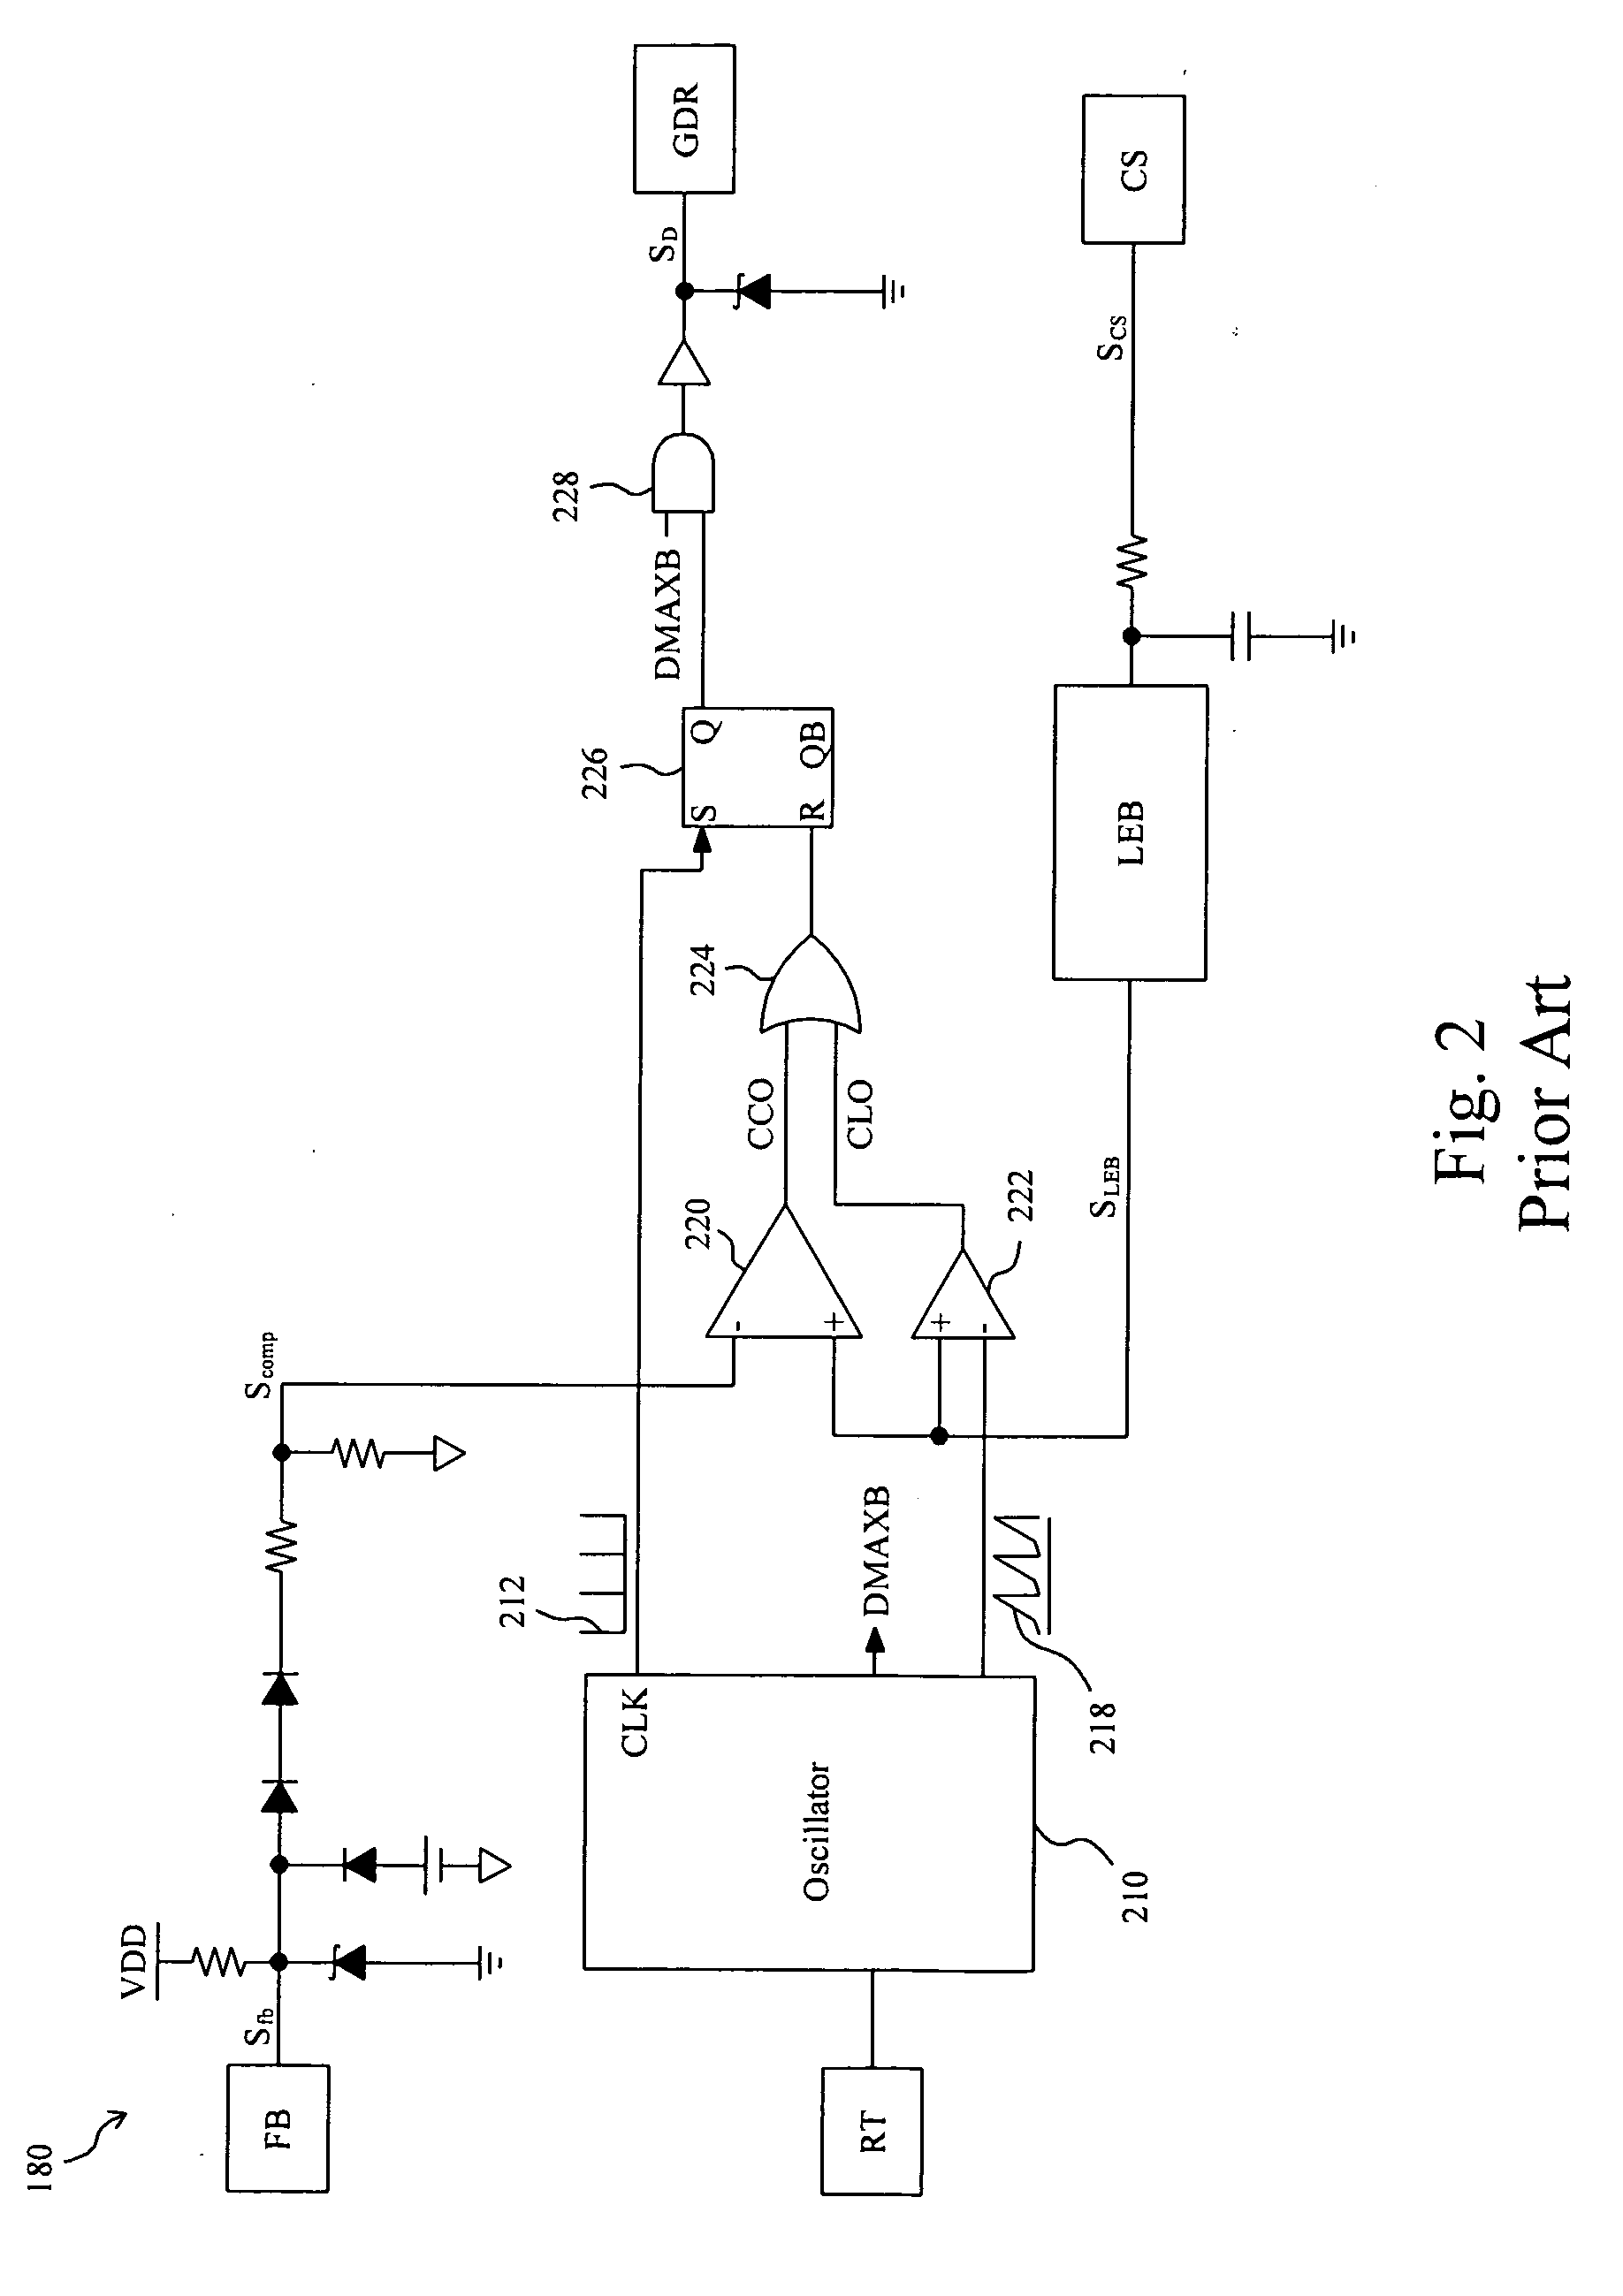 Apparatus and method for reducing the die area of a PWM controller